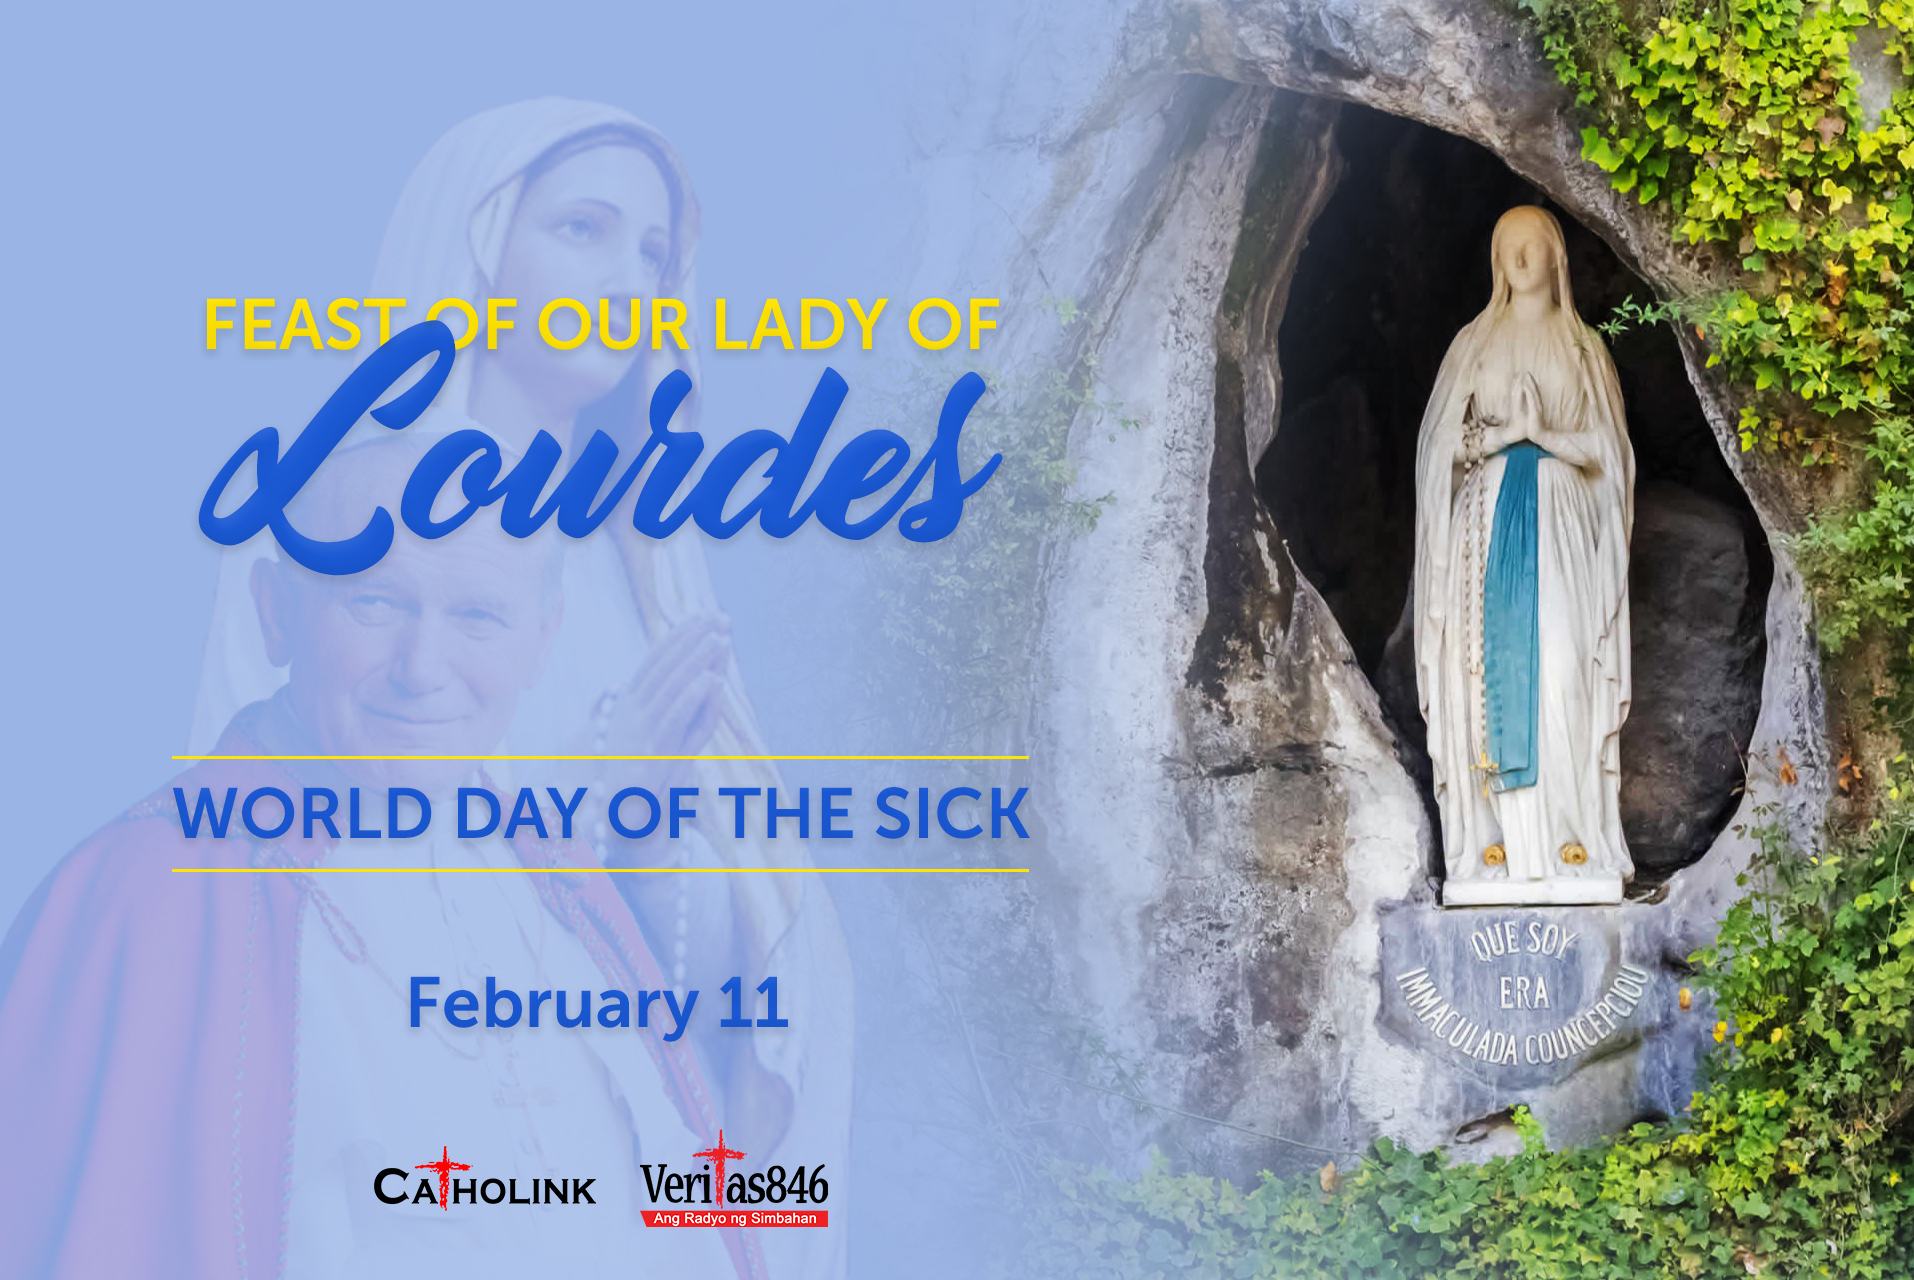 Feast of Our Lady of Lourdes World Day of the Sick Catholink